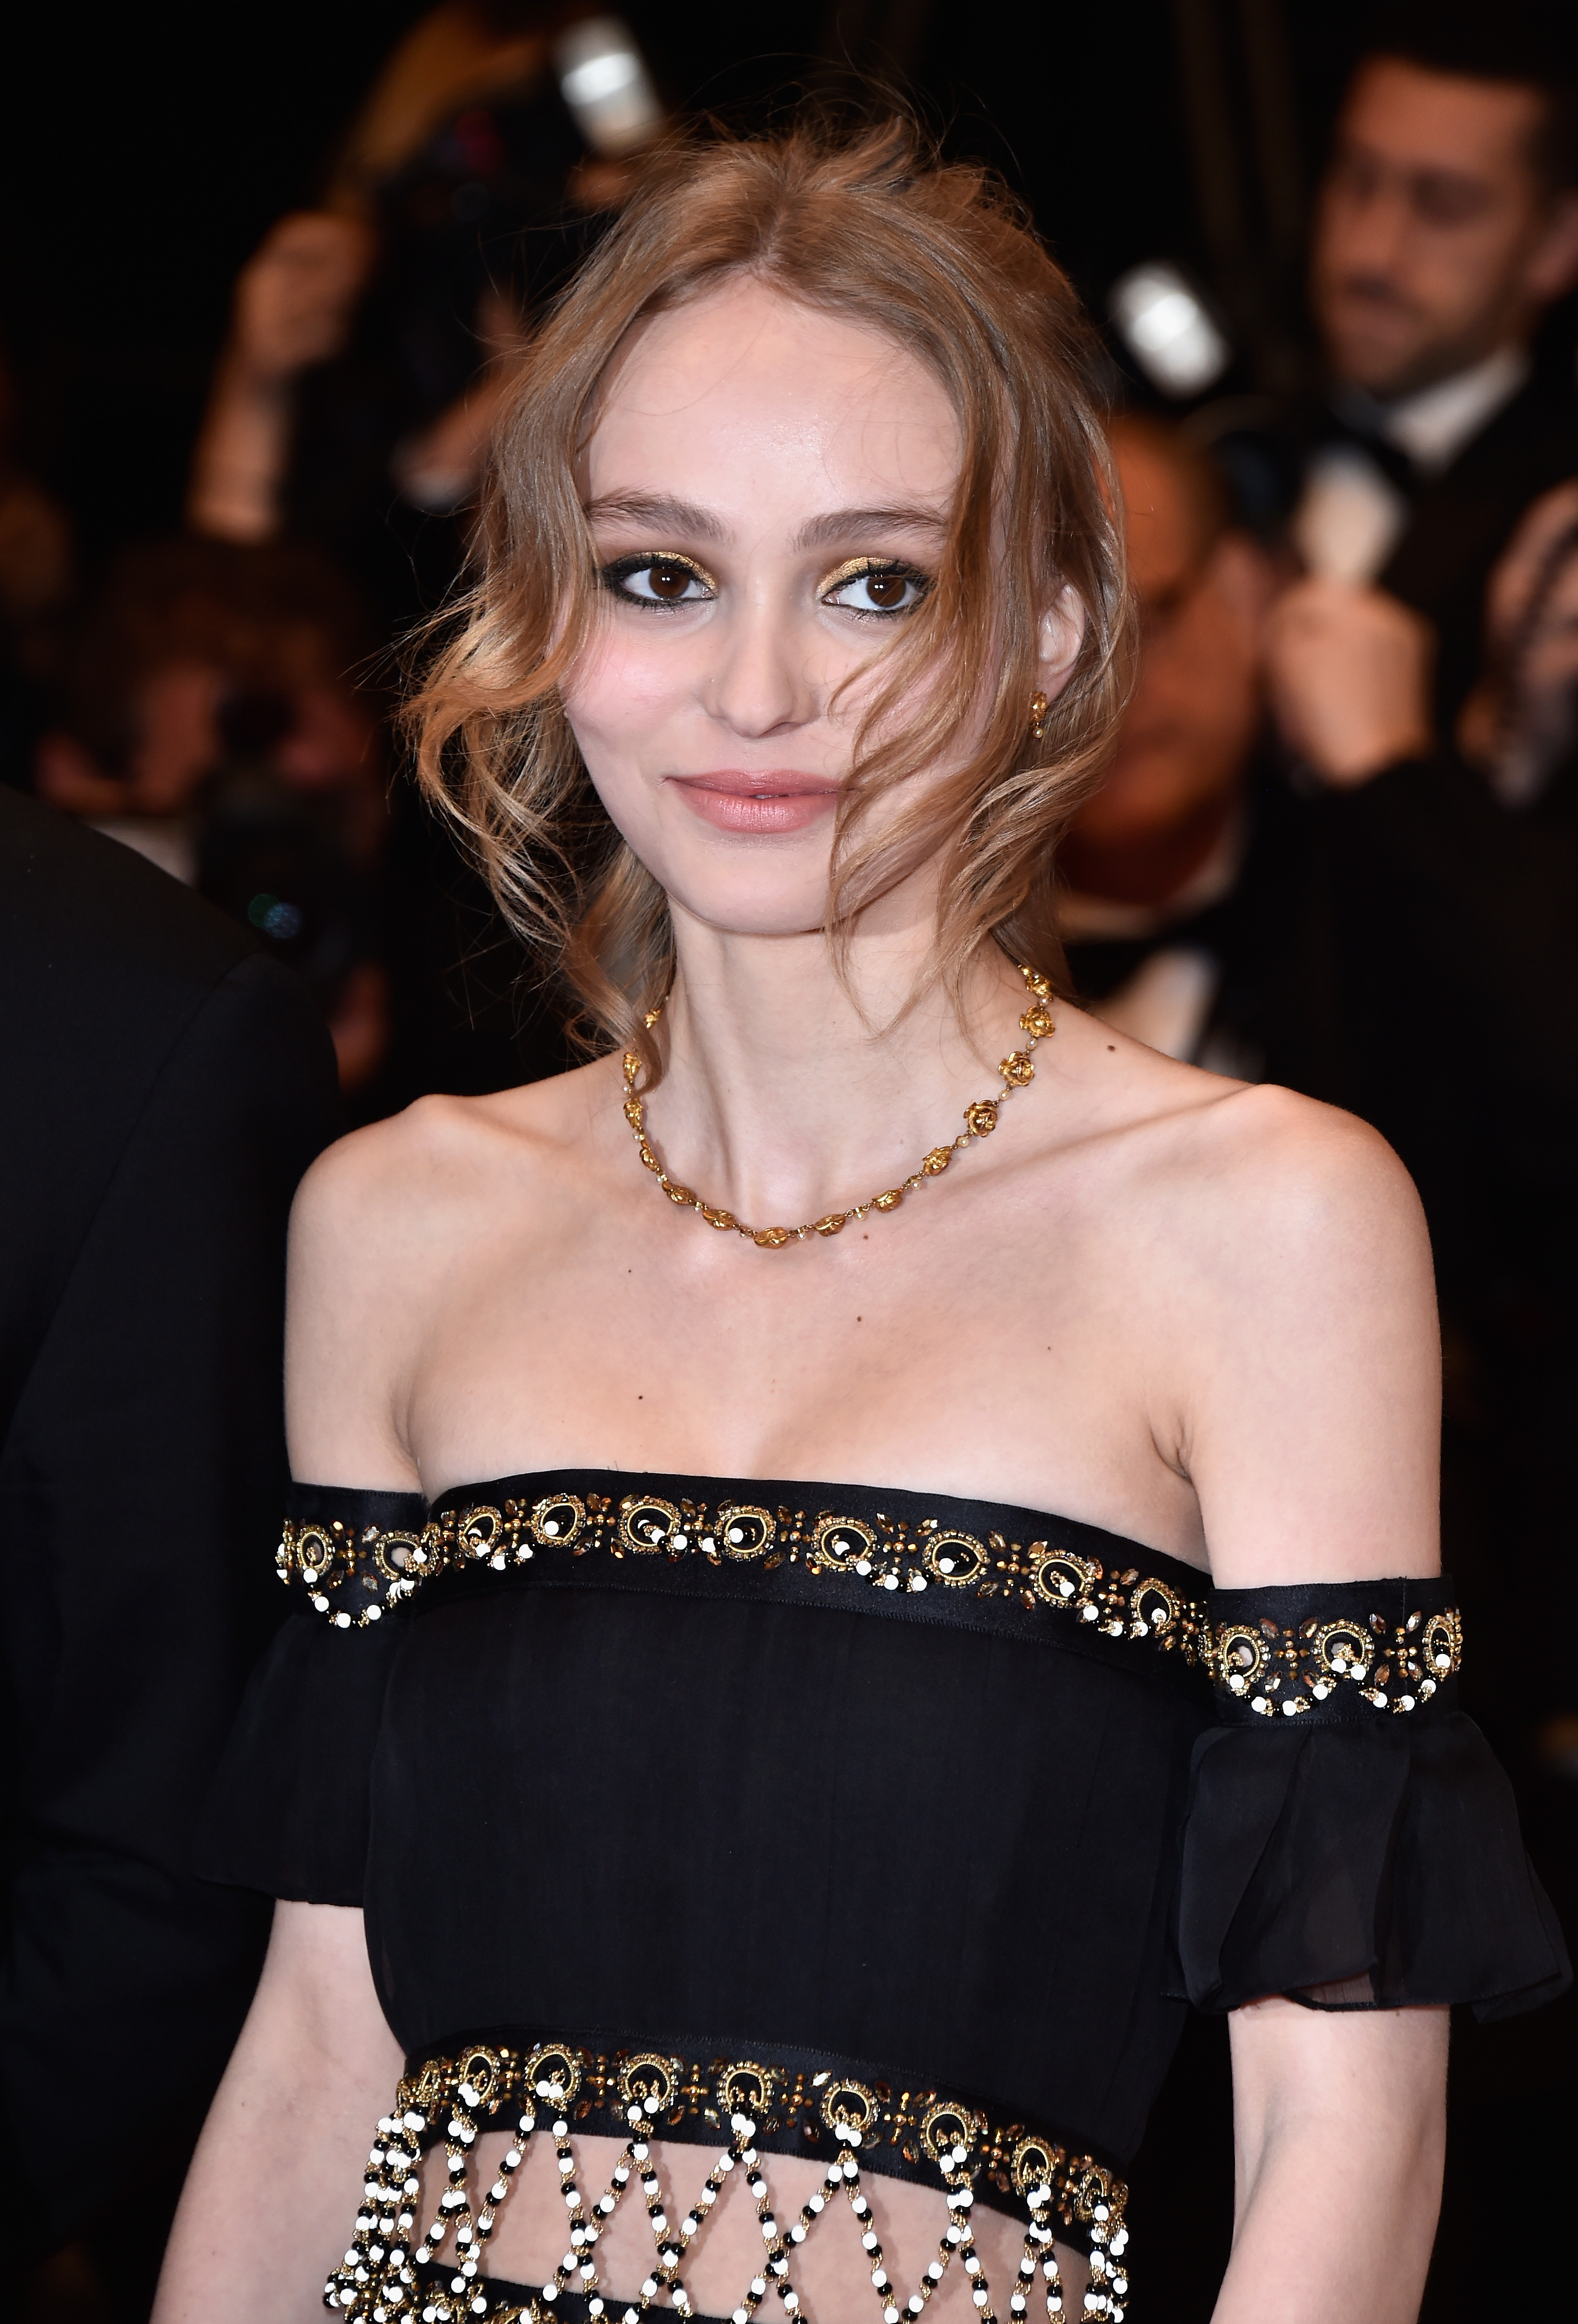 The Daily Roundup: Lily-Rose Depp Fronts Chanel's New Fragrance